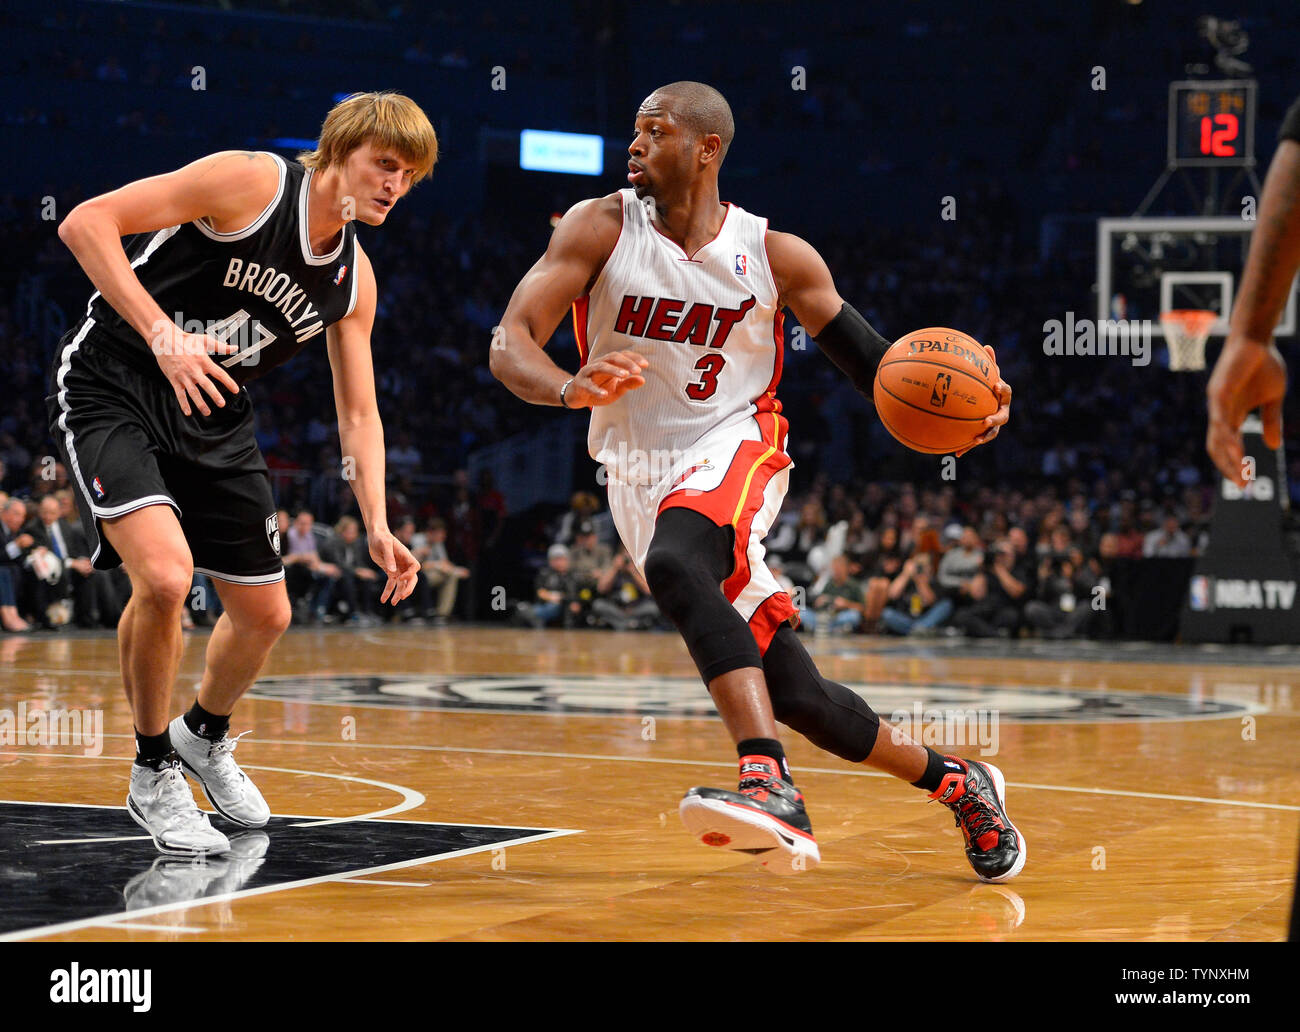 Miami Heat shooting guard Dwyane Wade (3) drives in against Brooklyn Nets small forward Andrei Kirilenko (47) in the second quarter at Barclays Center in New York City on November 1, 2013.   UPI/Rich Kane Stock Photo